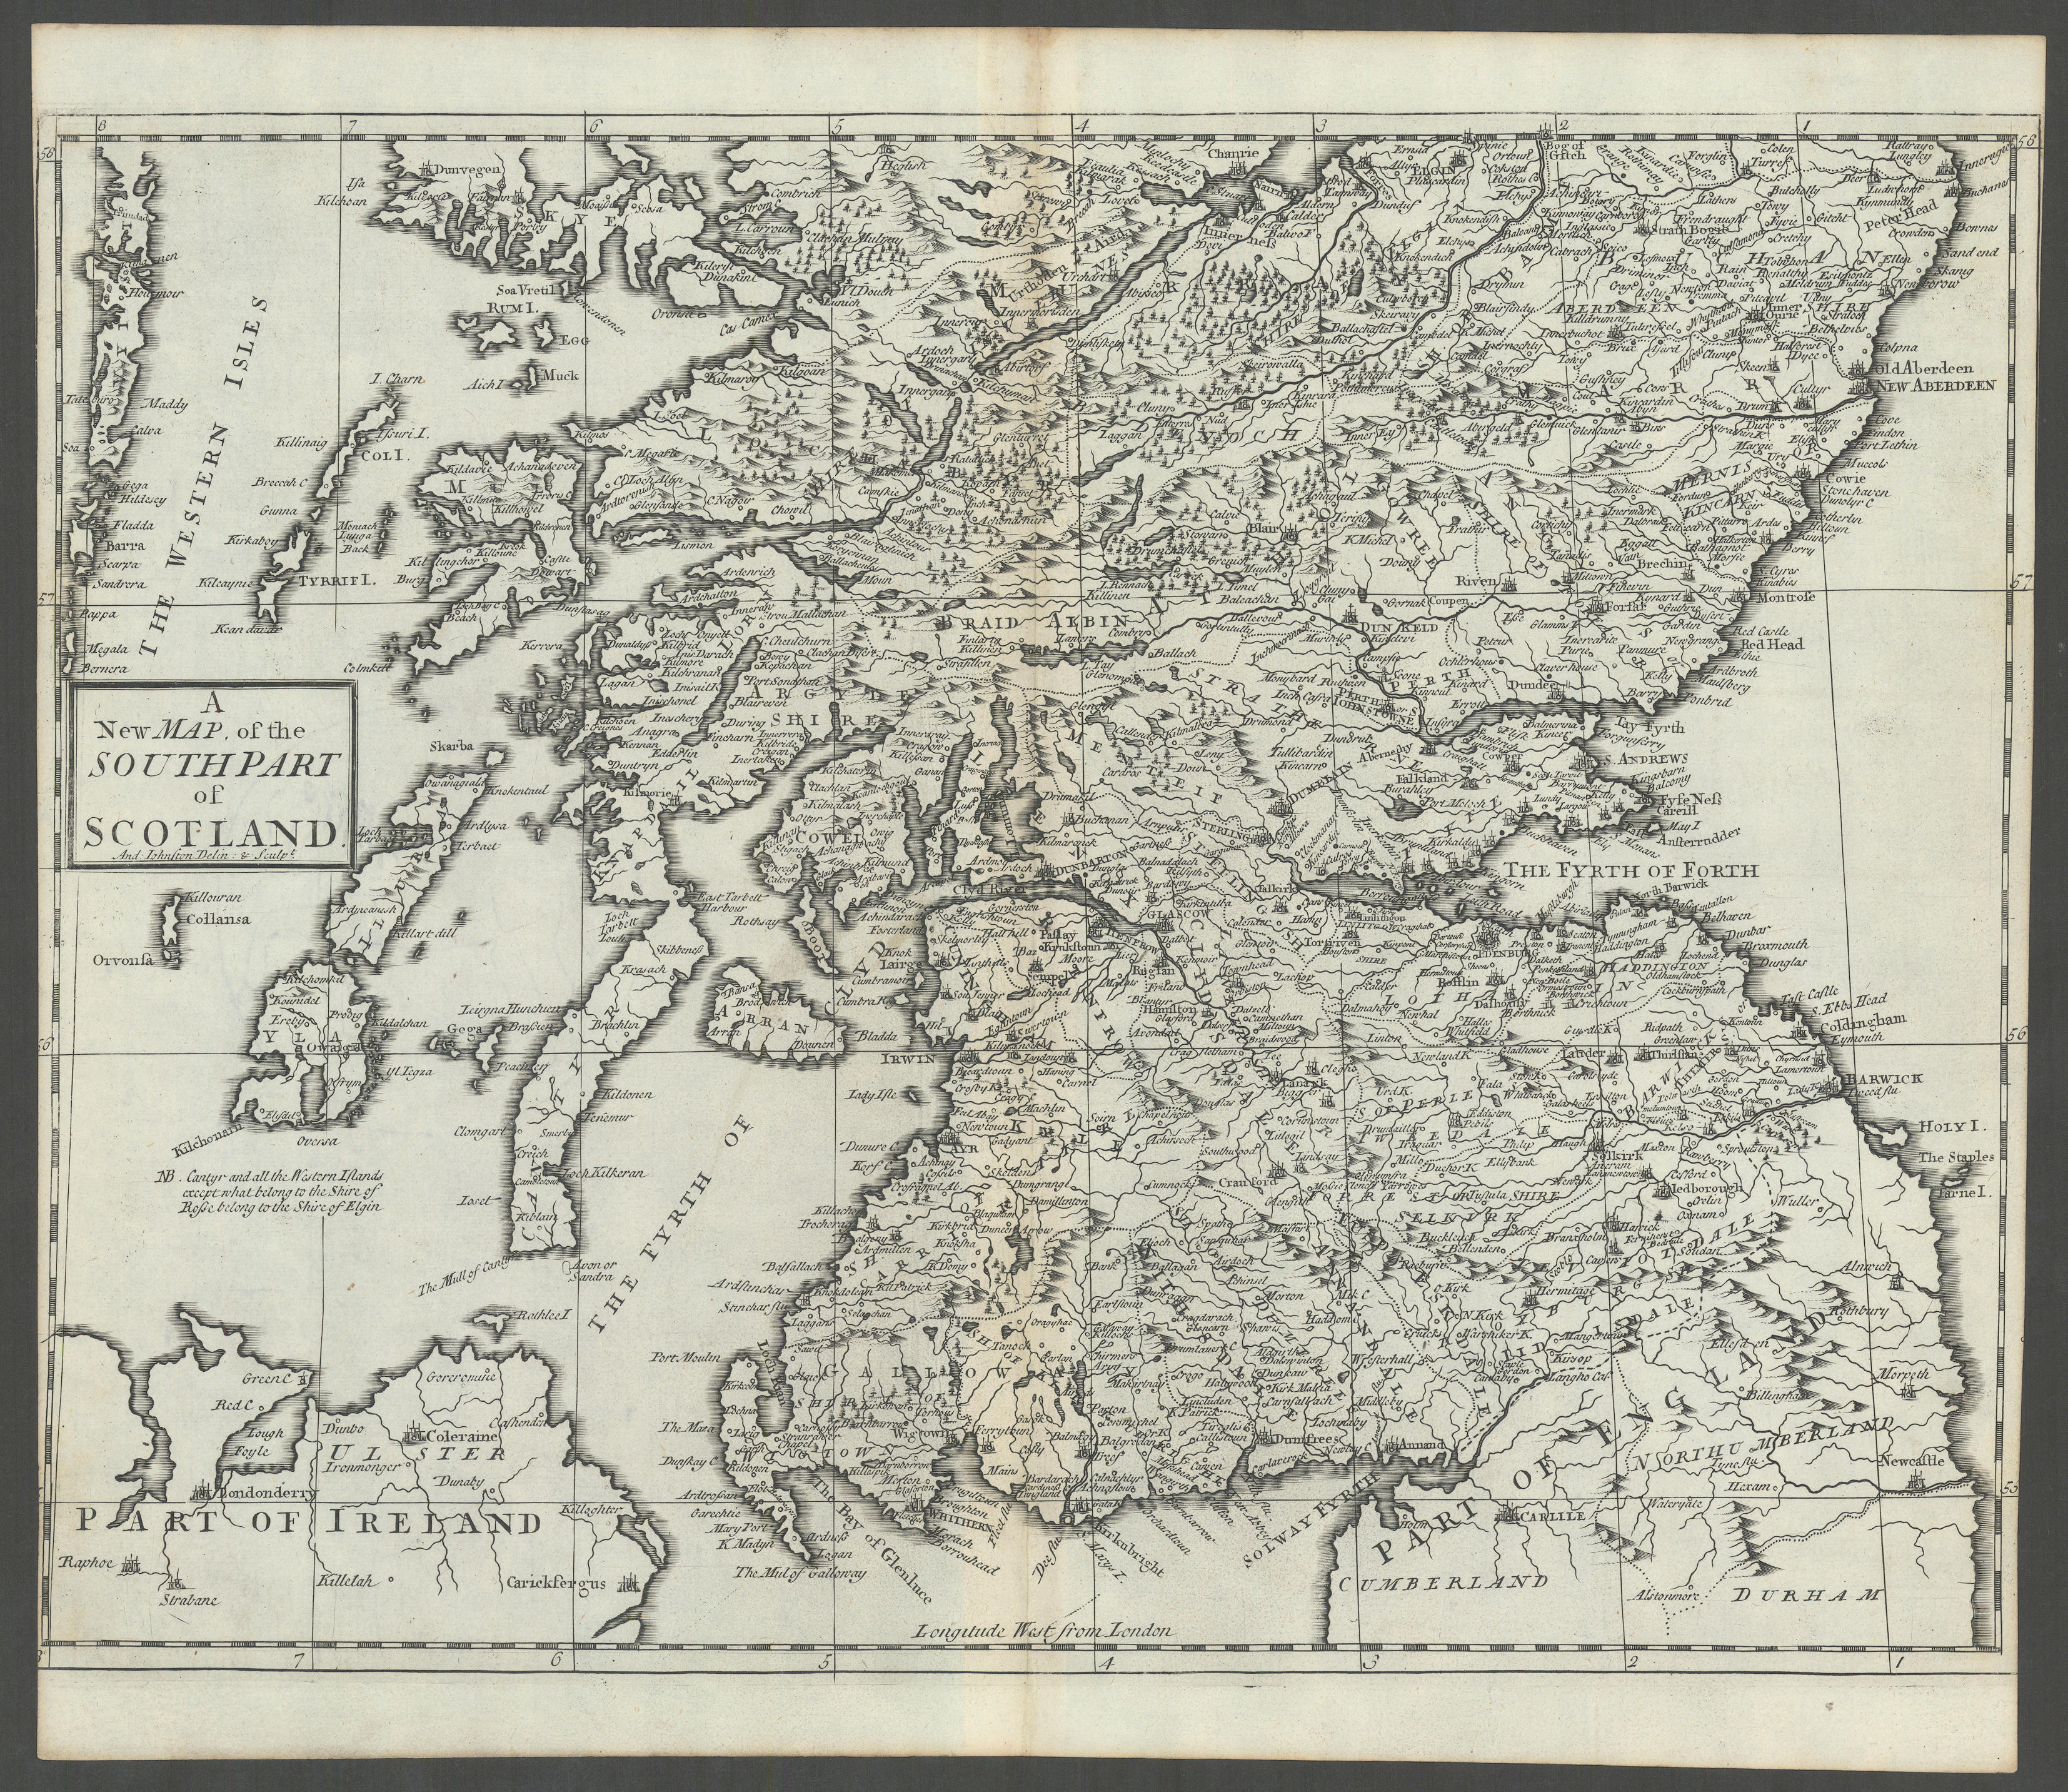 Associate Product SOUTHERN SCOTLAND by ANDREW JOHNSTON from Camden's Britannia 1722 old map